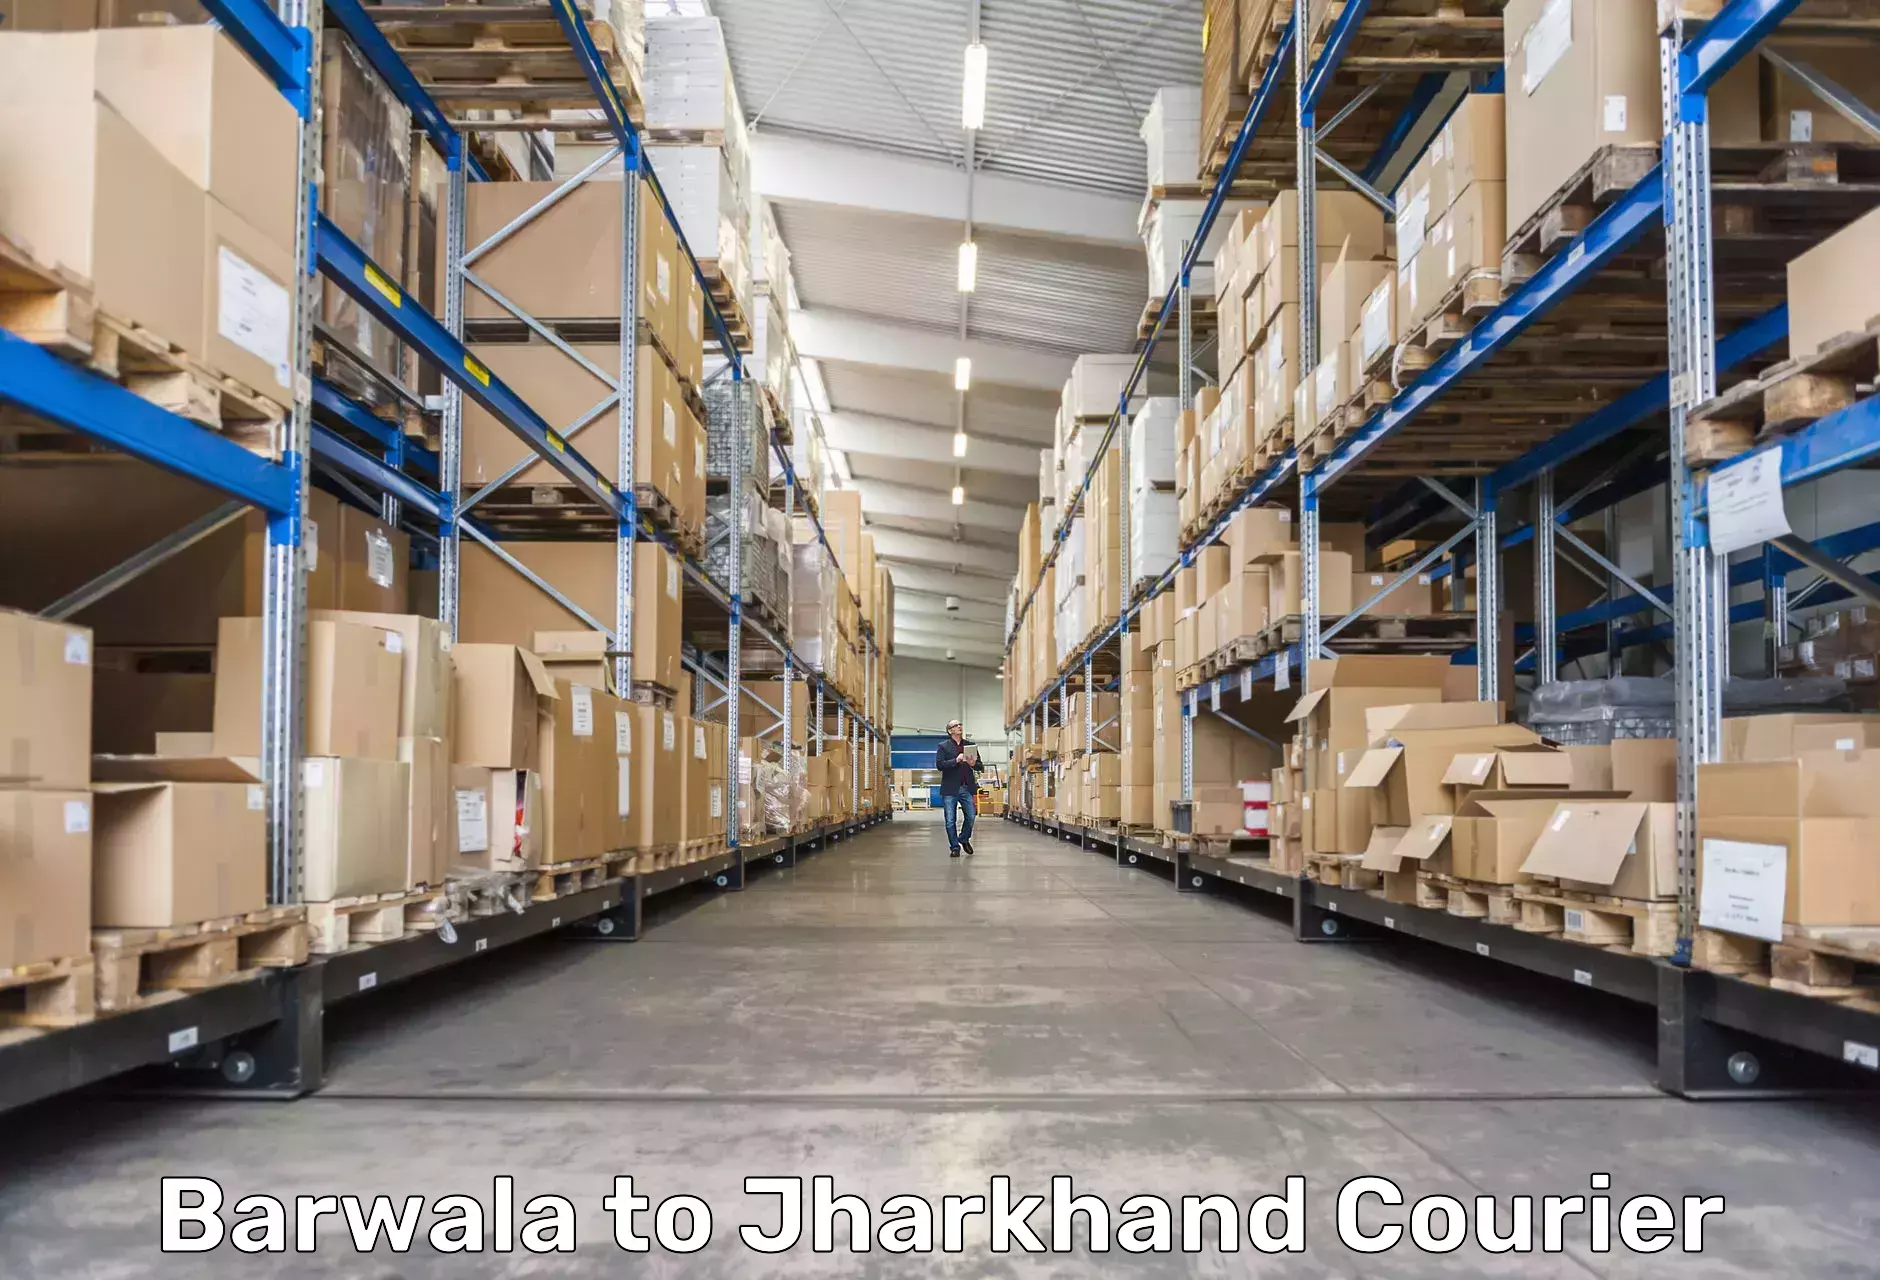 Secure freight services Barwala to Jamshedpur